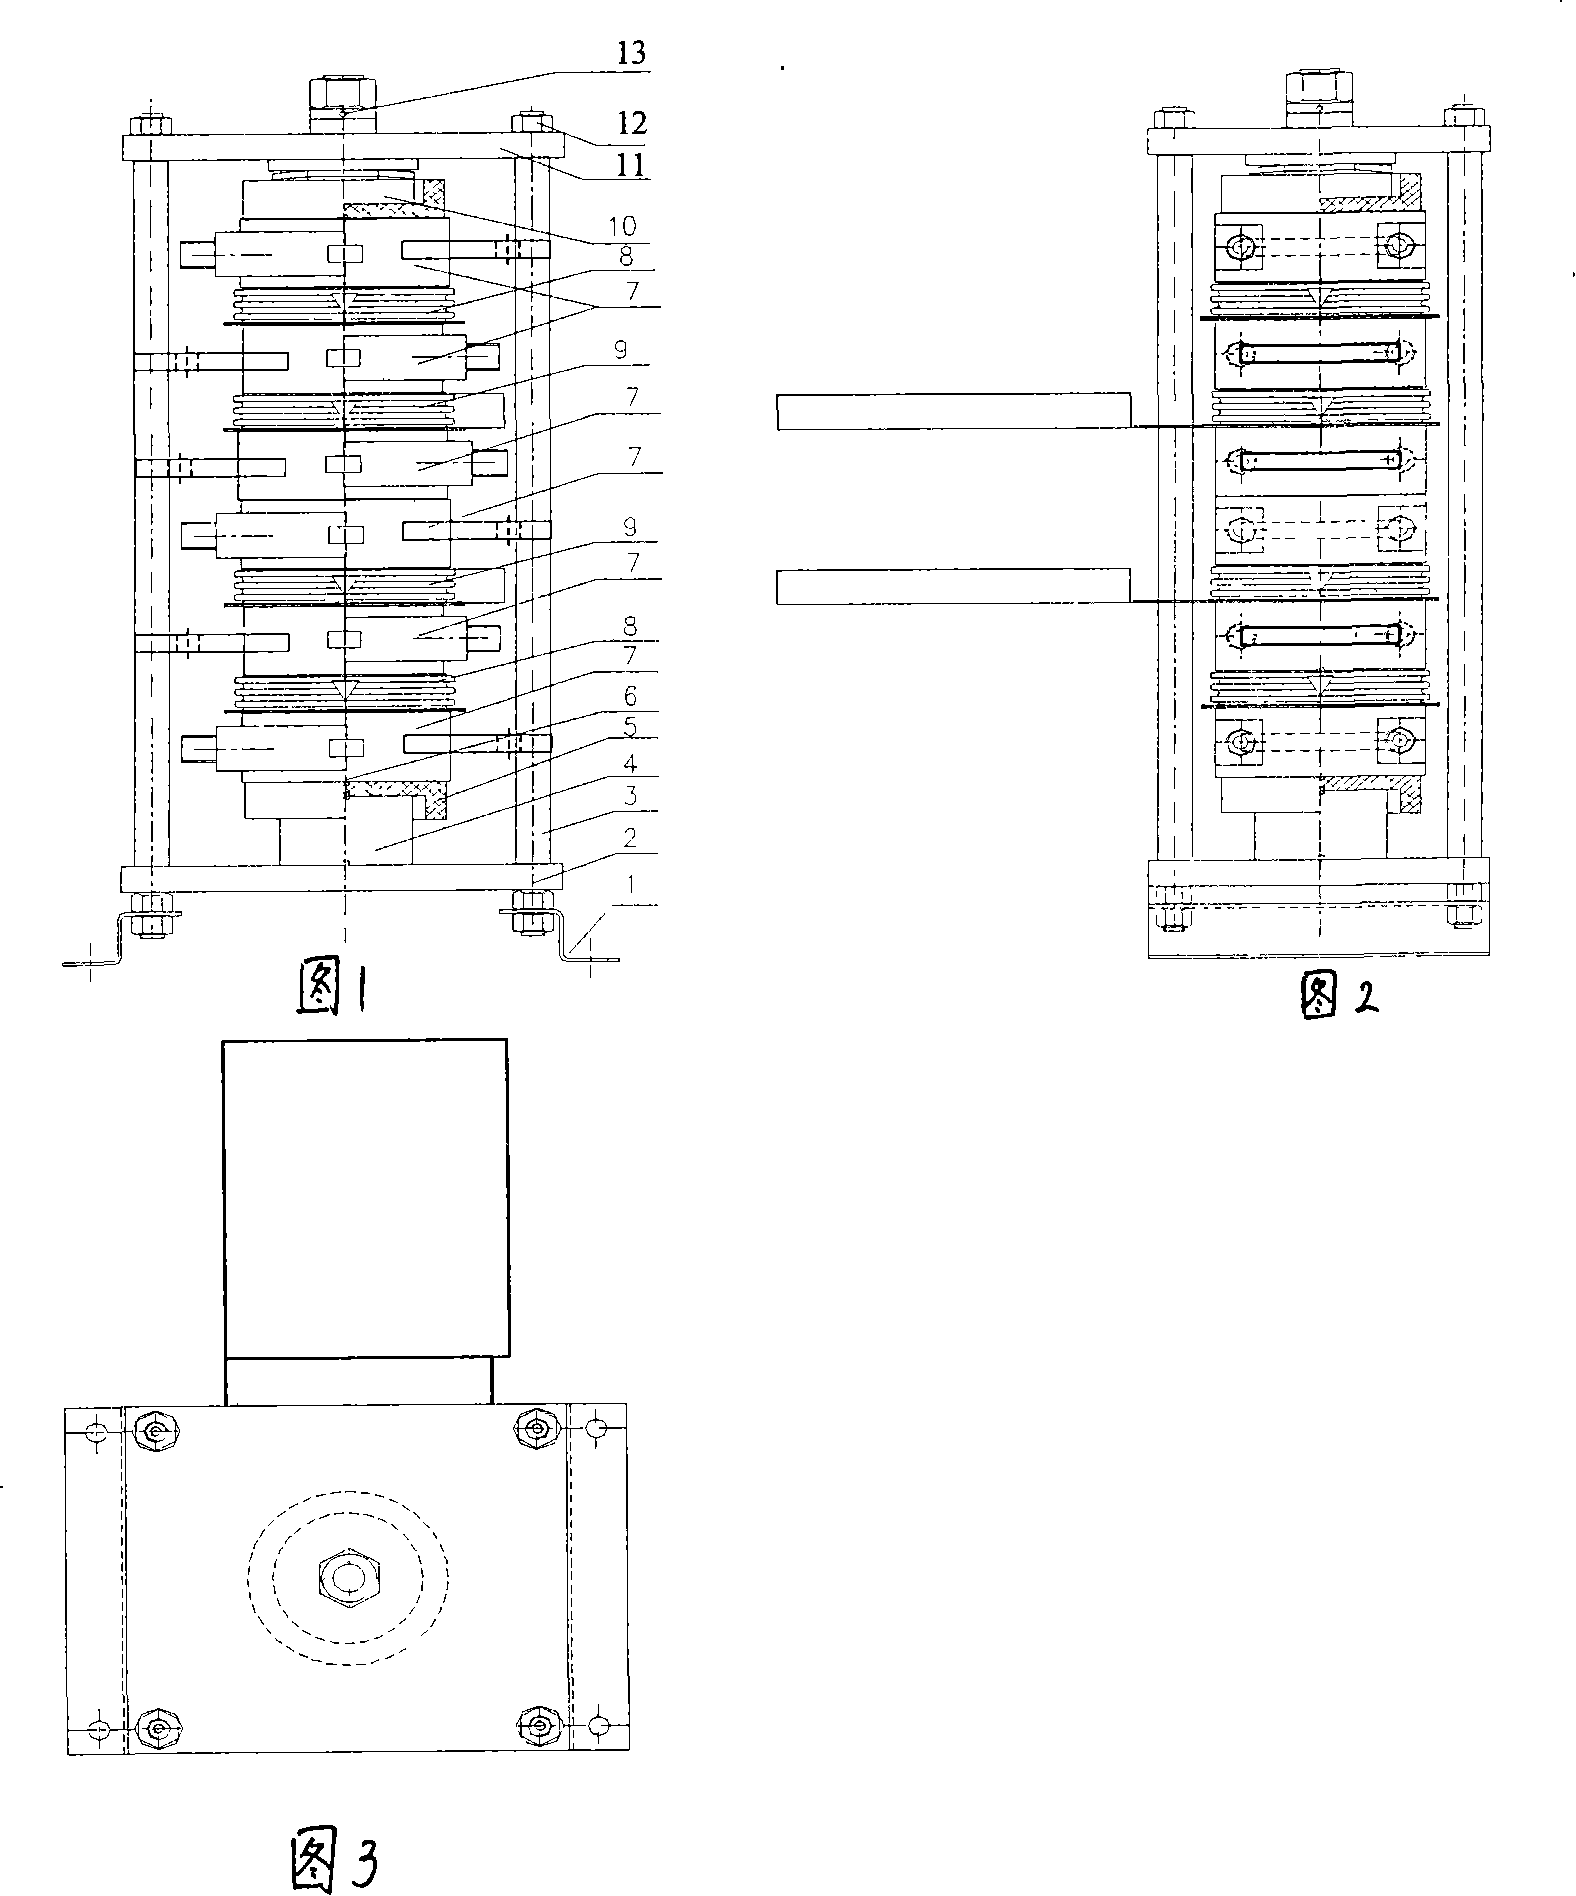 Press-loading valve stack for large power all-controlled semiconductor device